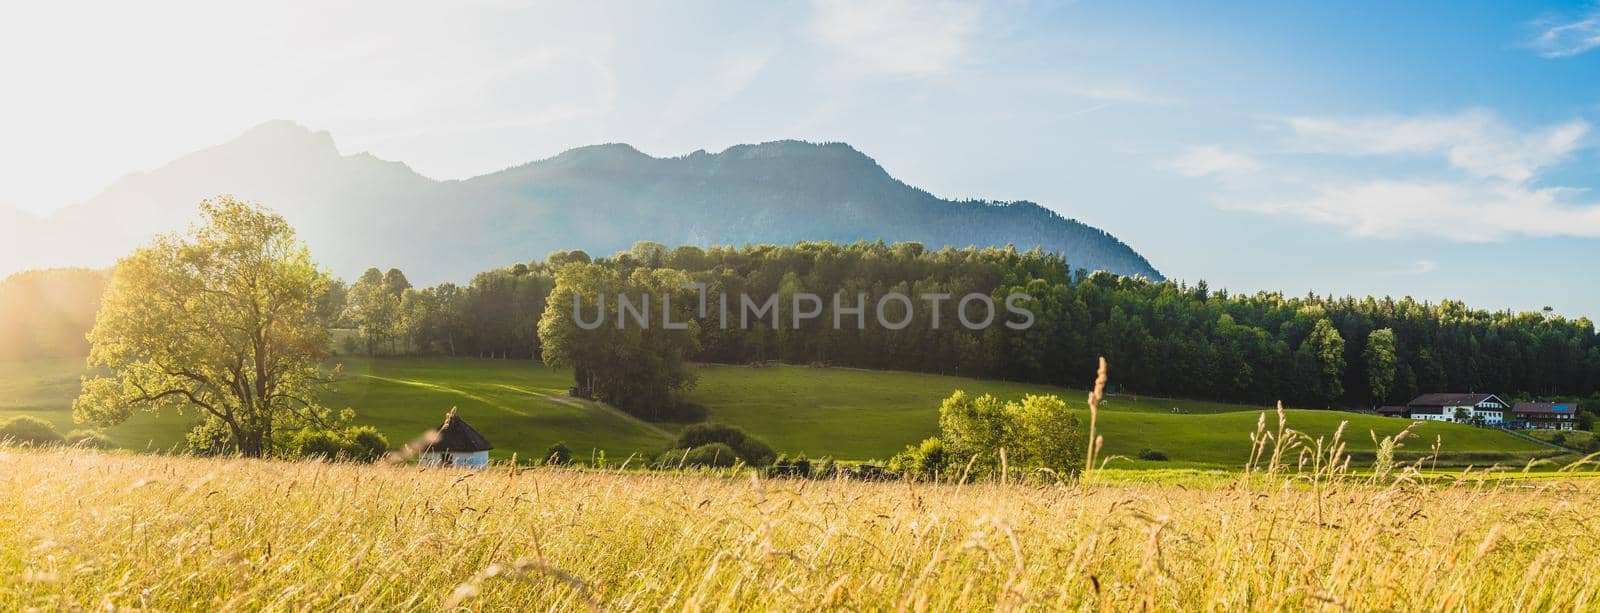 Scenic sunset view over meadow, hills and mountains.